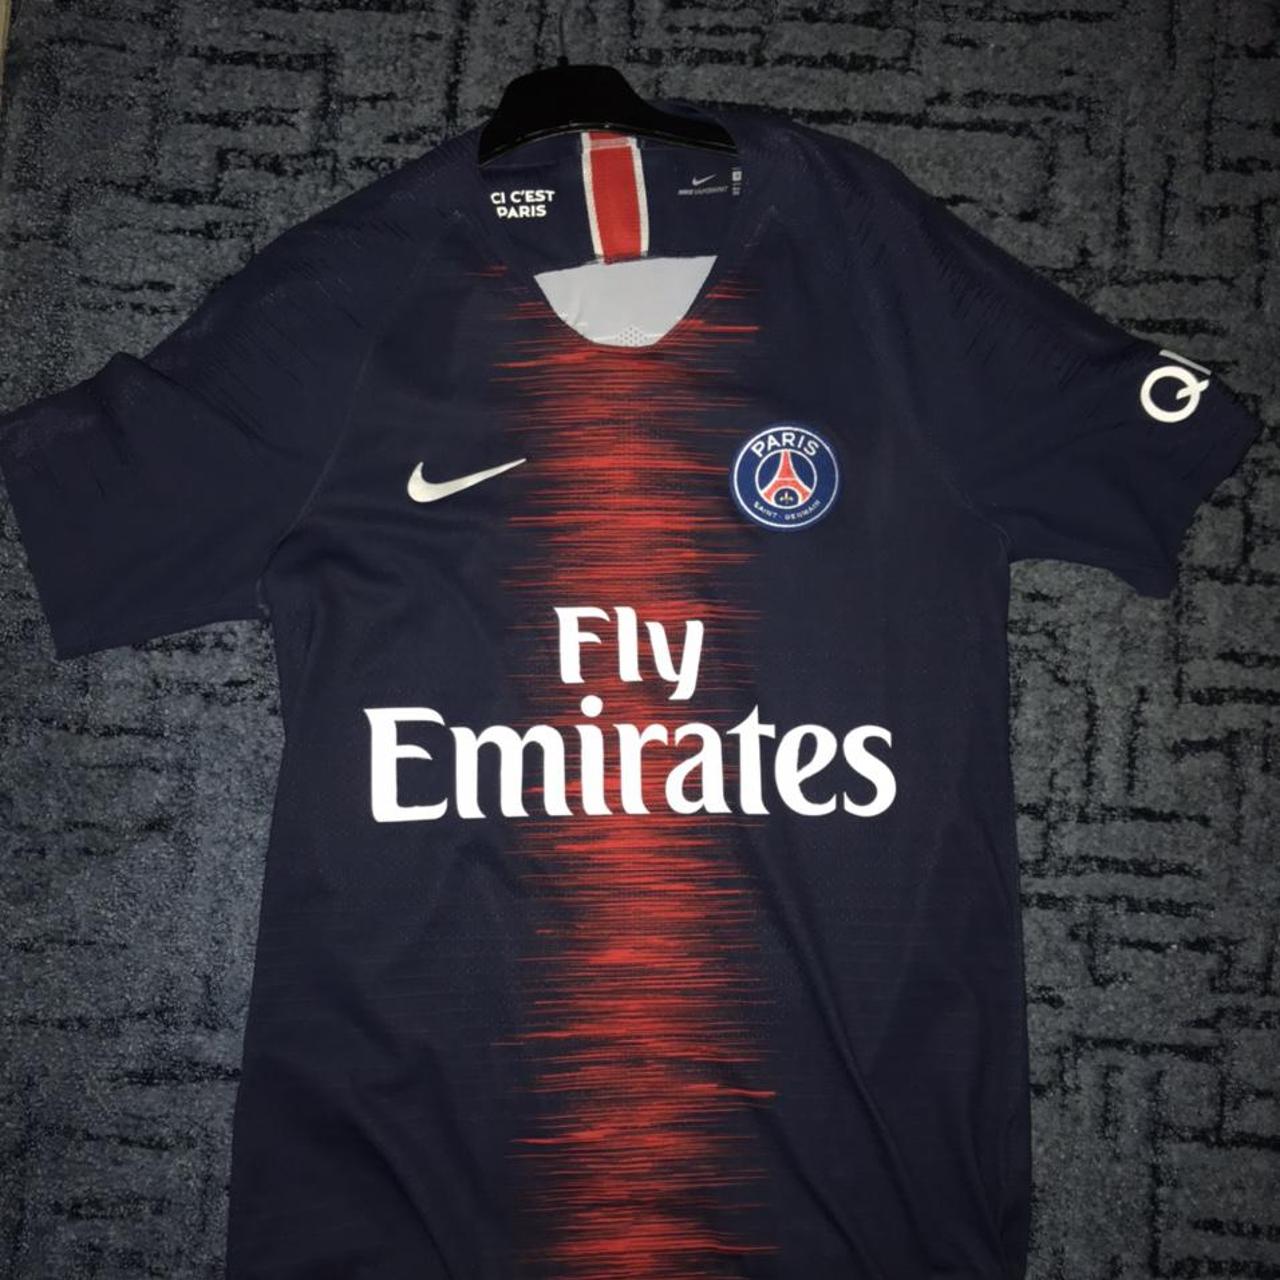 PSG Nike Vapor top usually £100 Barely worn Offers... - Depop